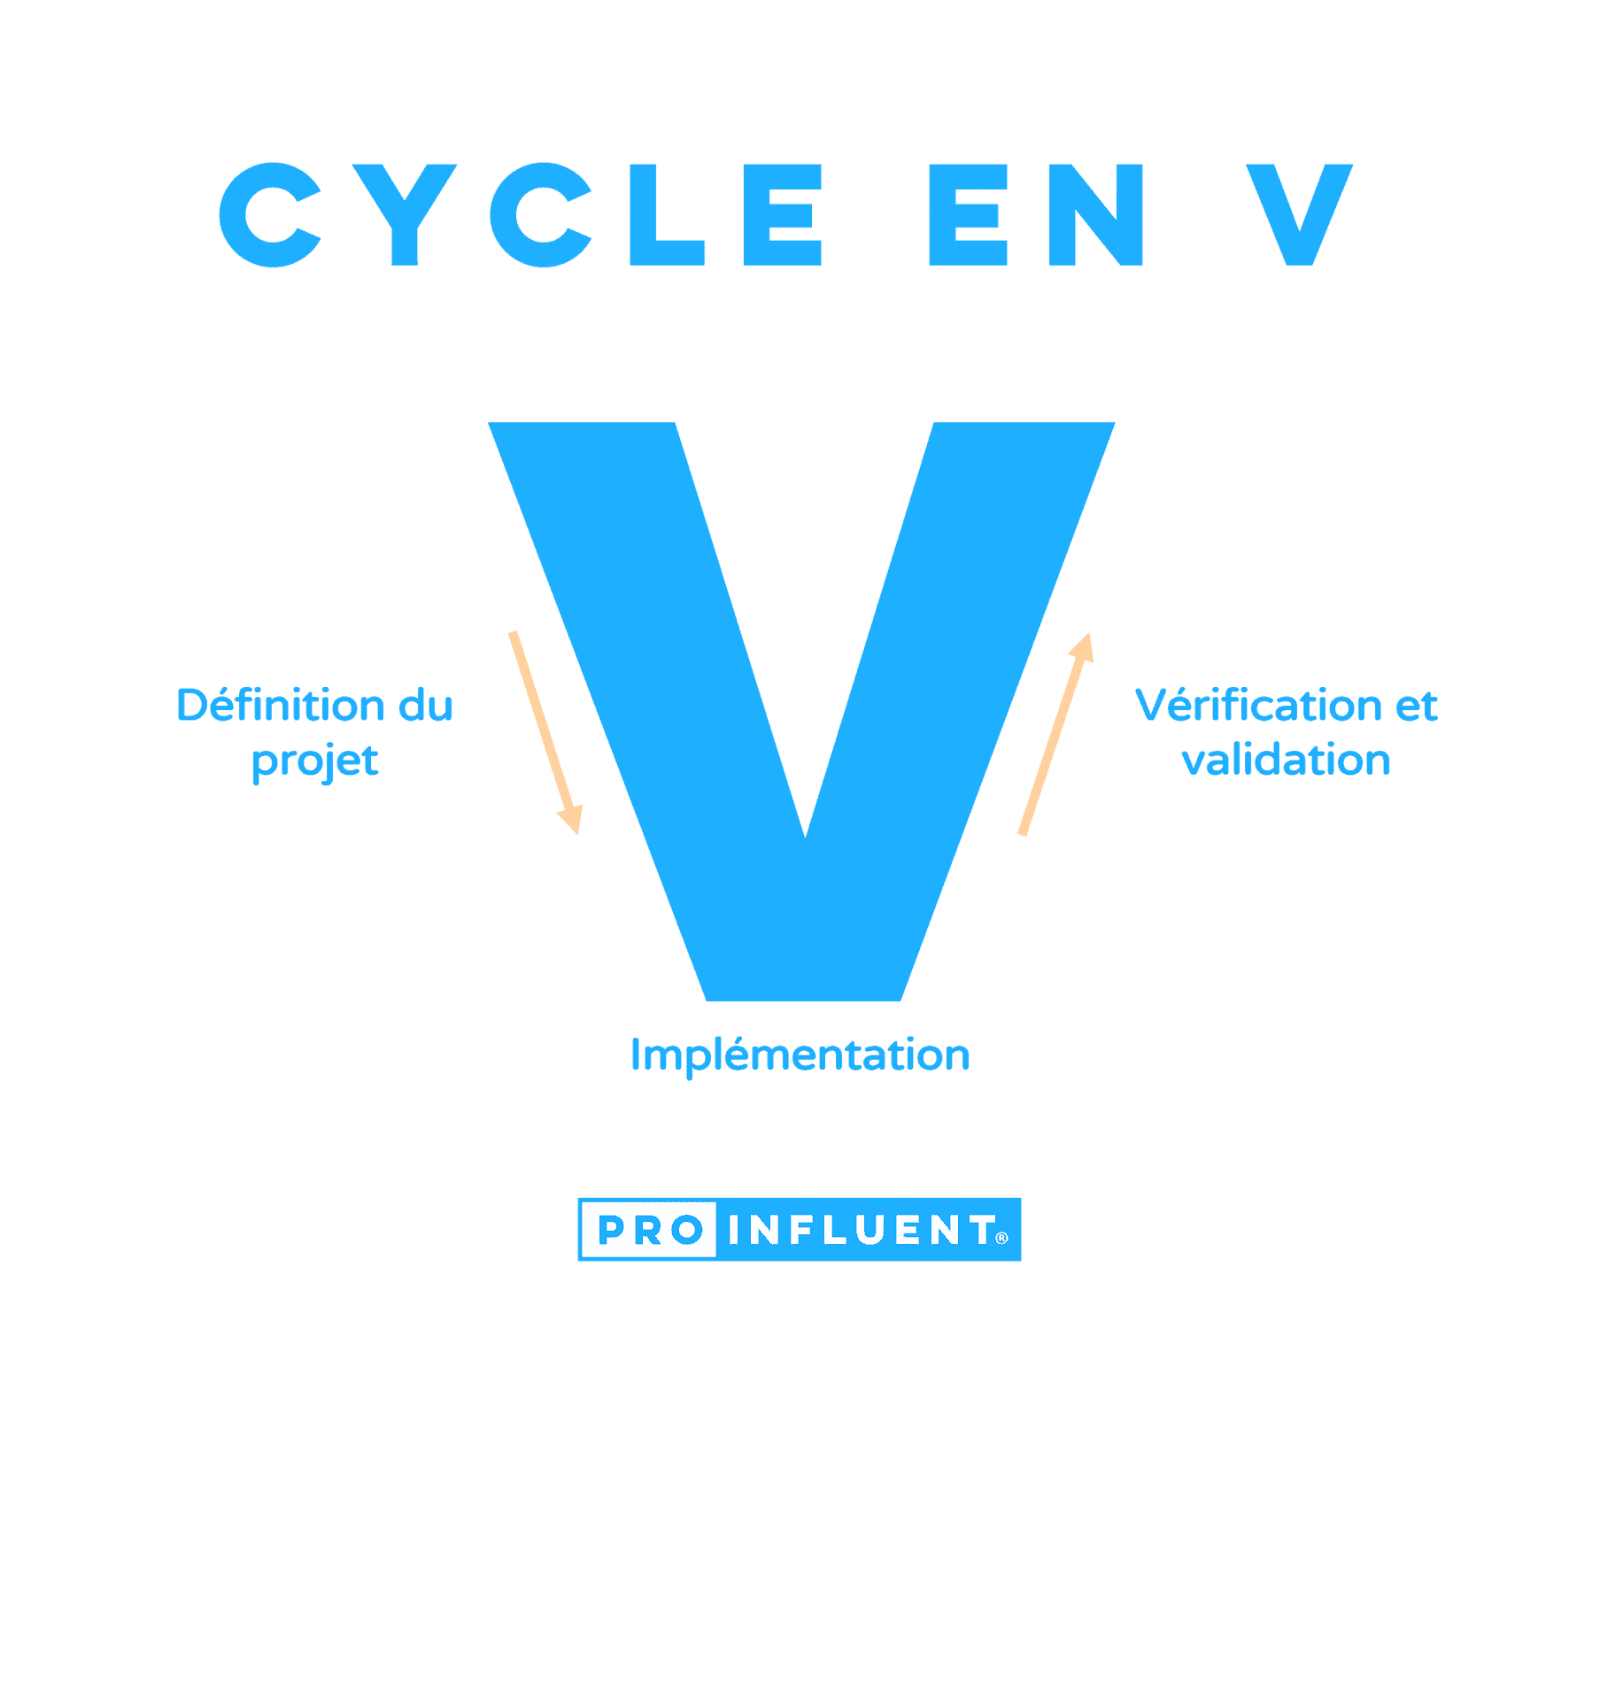 Definition of the V-cycle